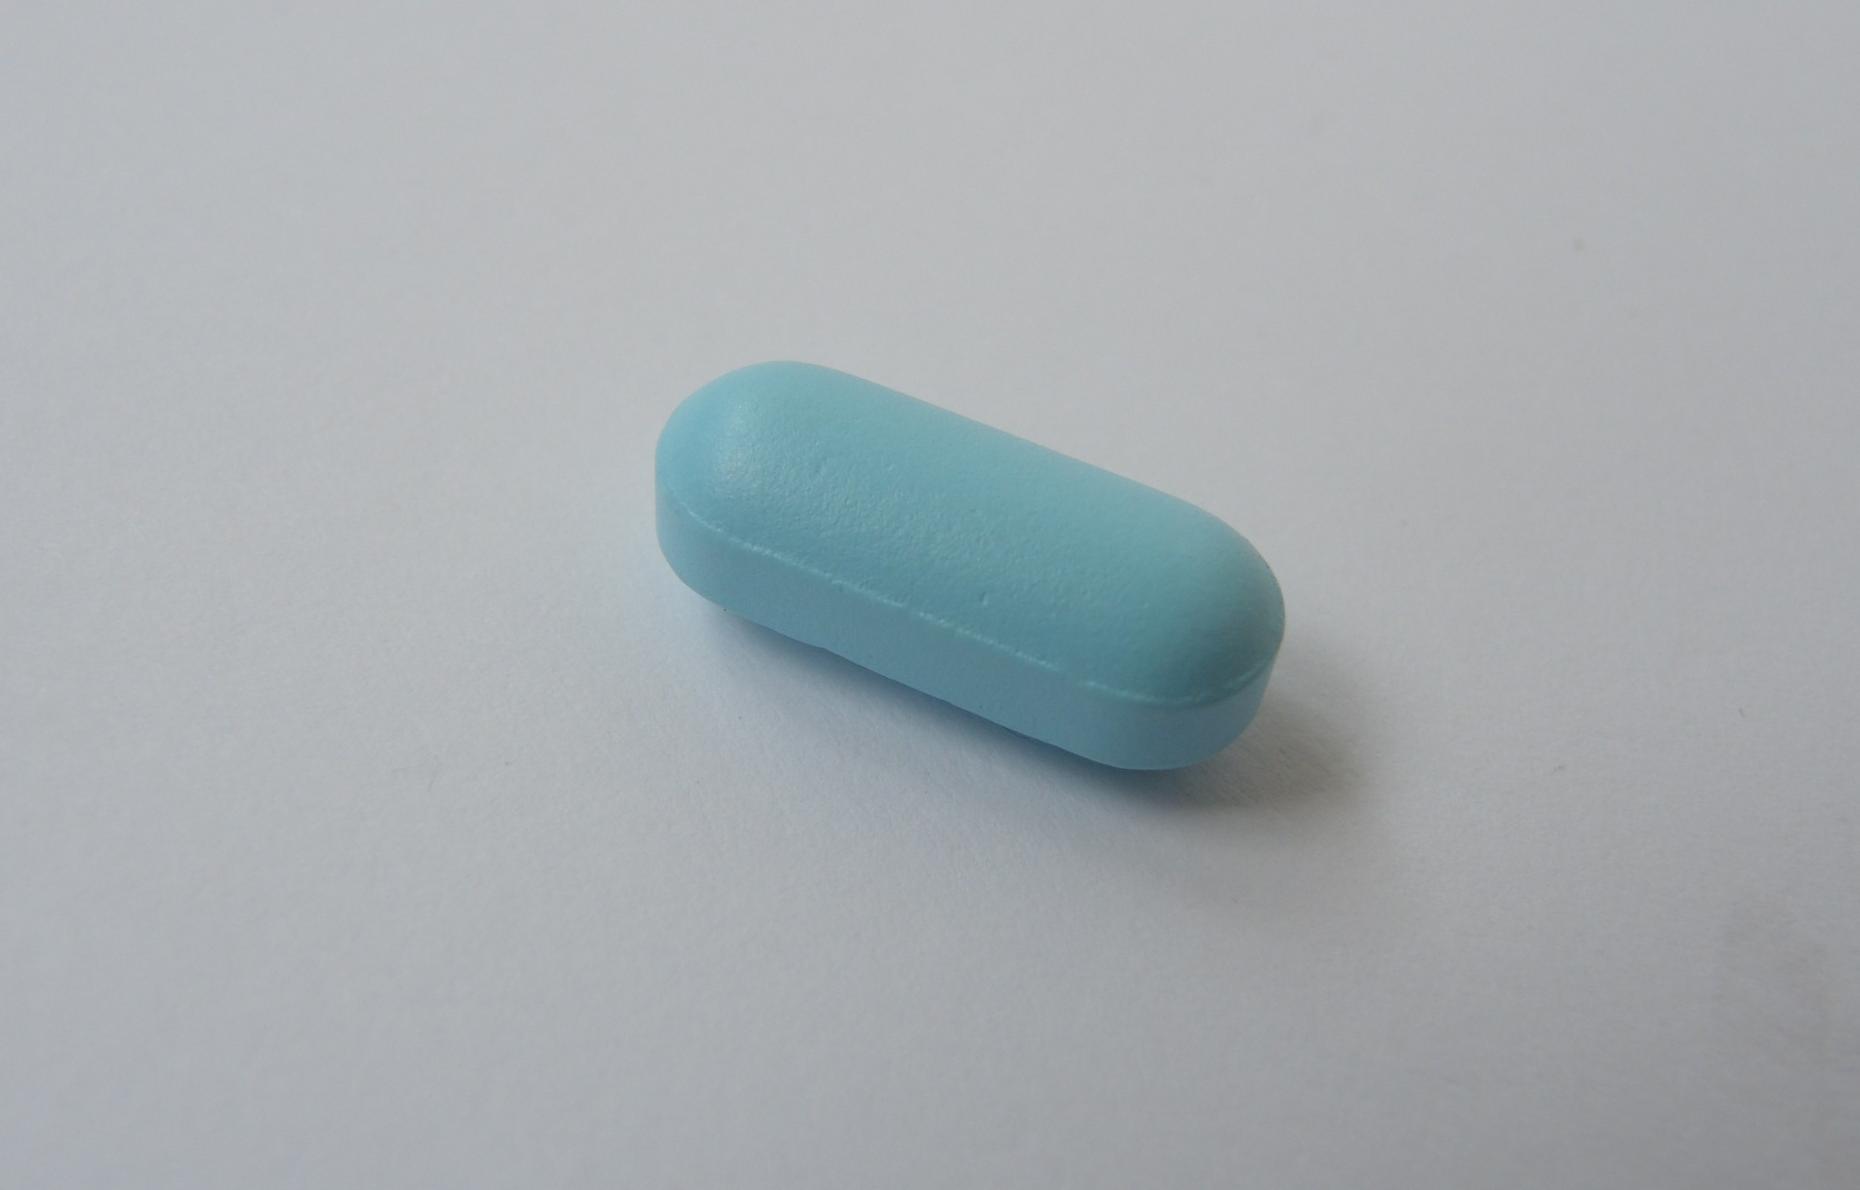 A loose Viagra 100mg pill on a white surface